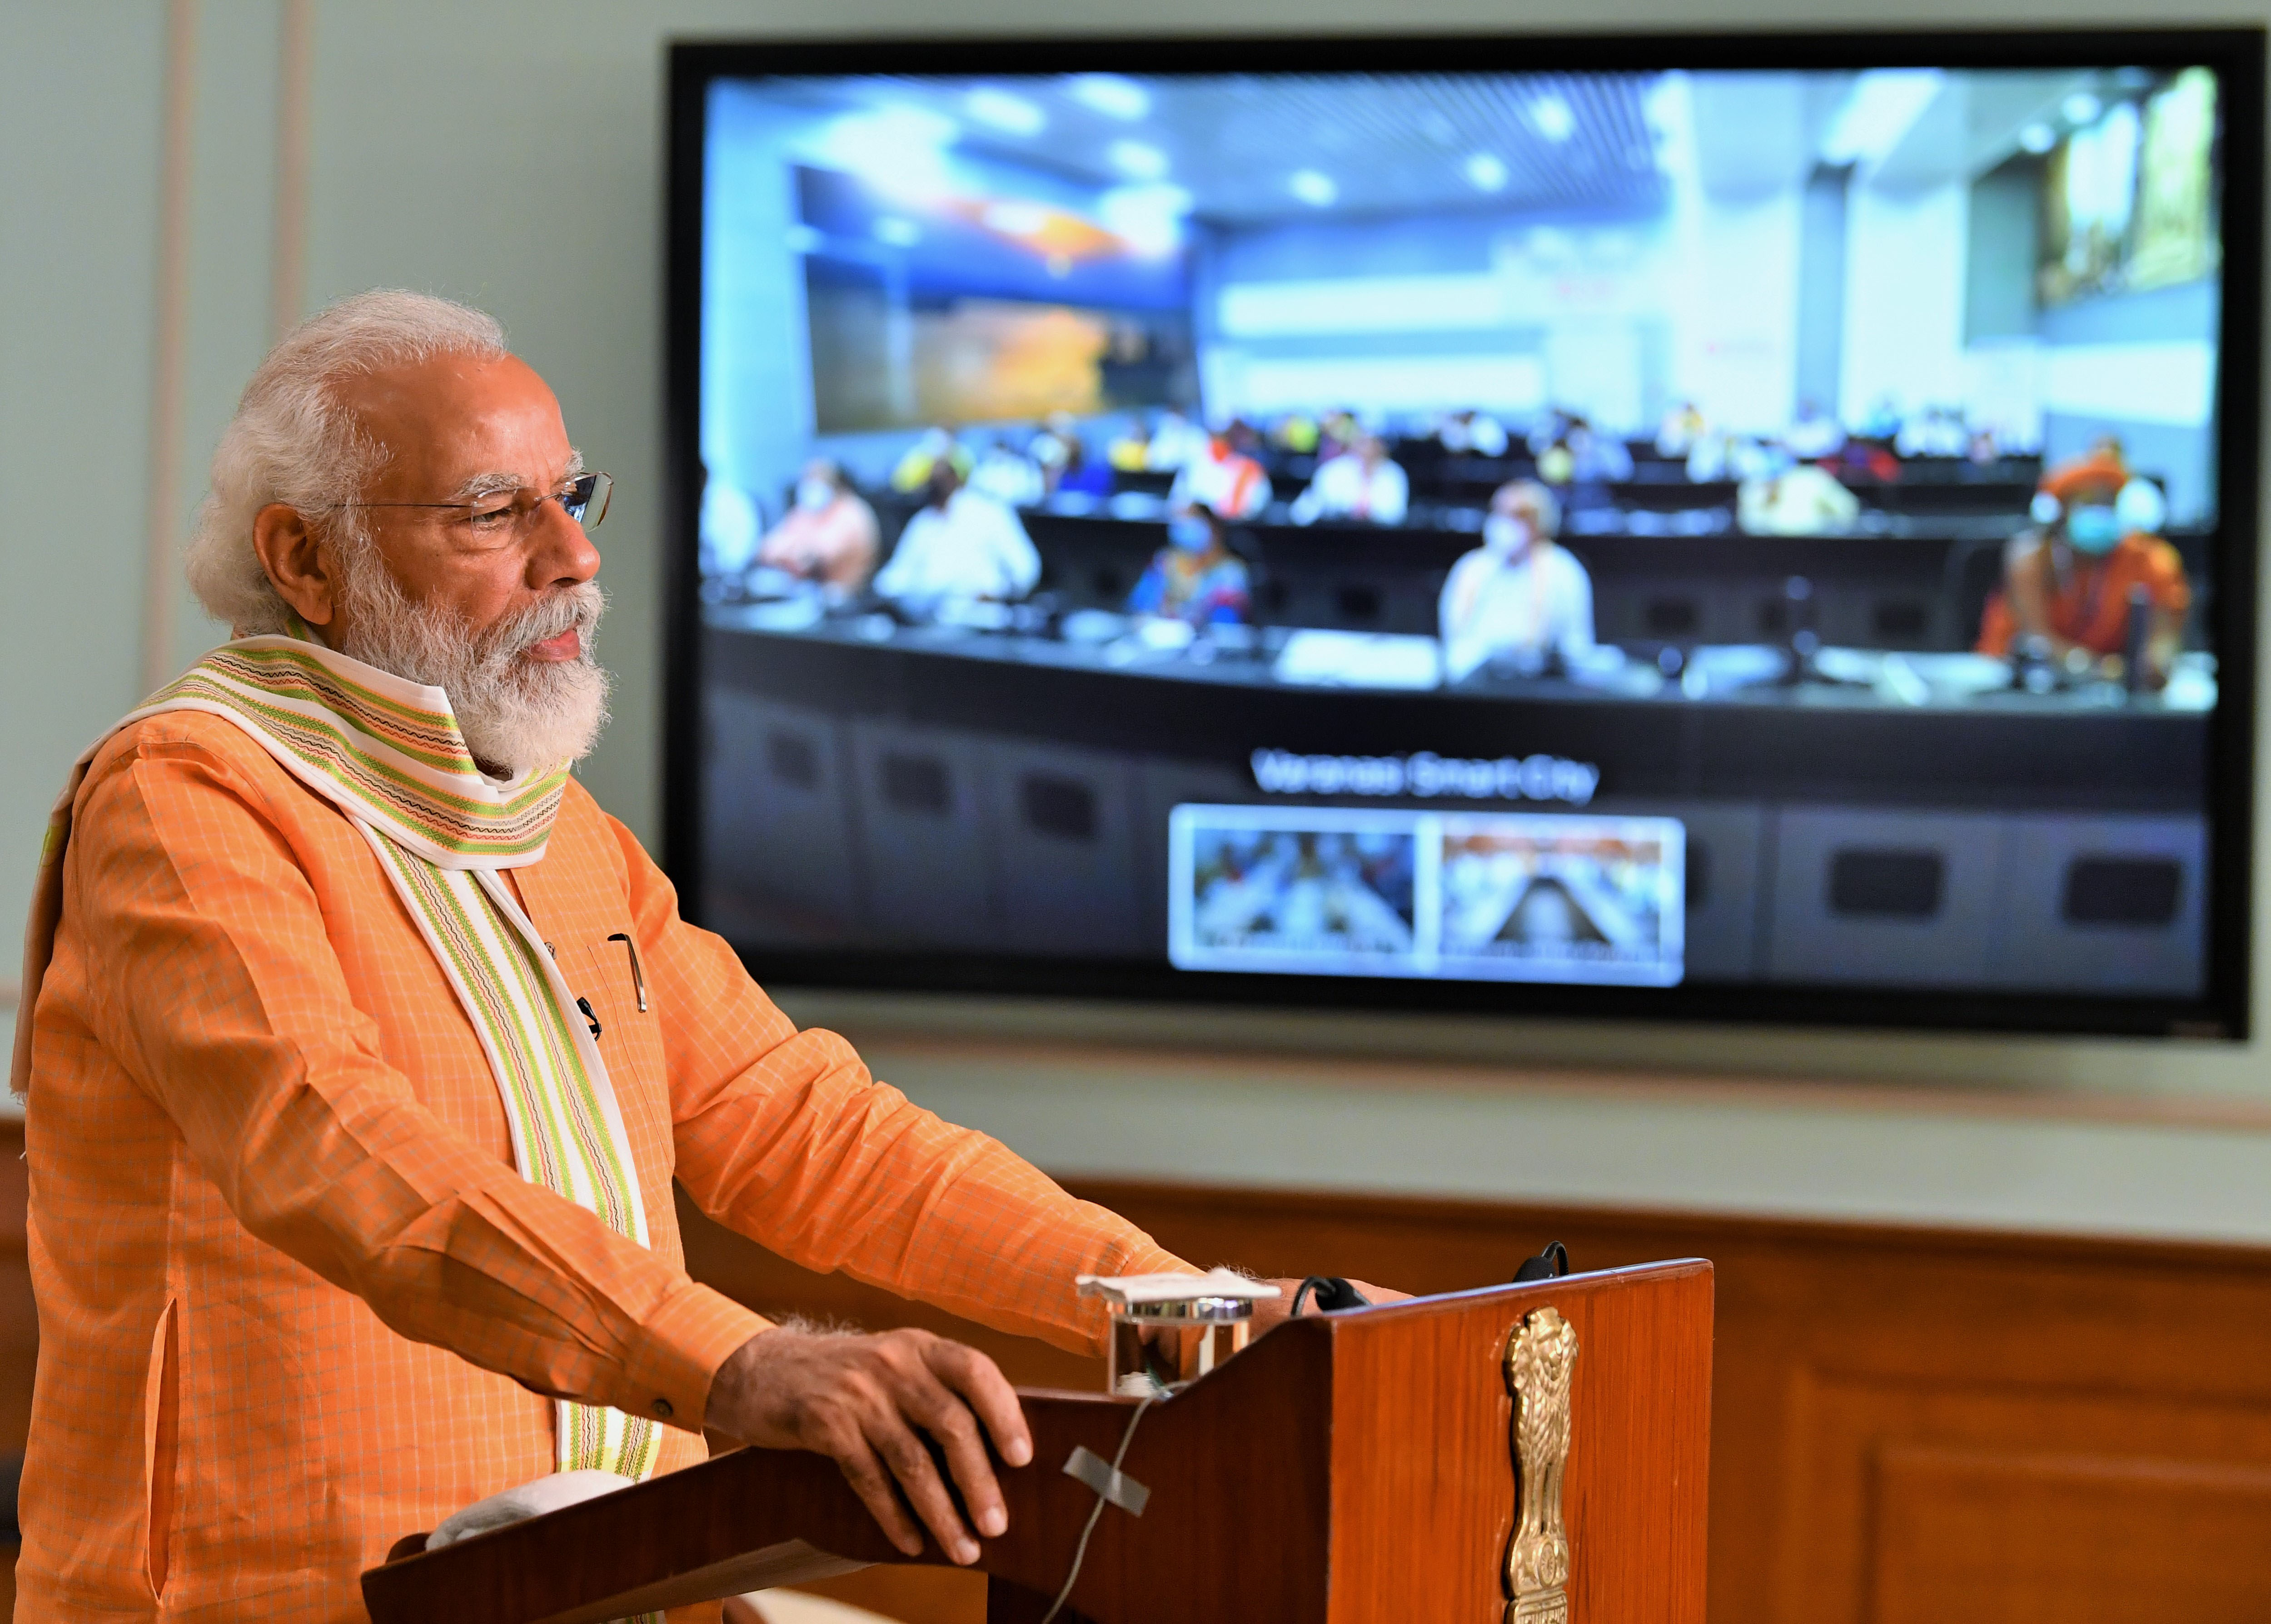 PM Modi reiterates India’s commitment towards its vision of participatory developmental works in Indian Ocean decoding=